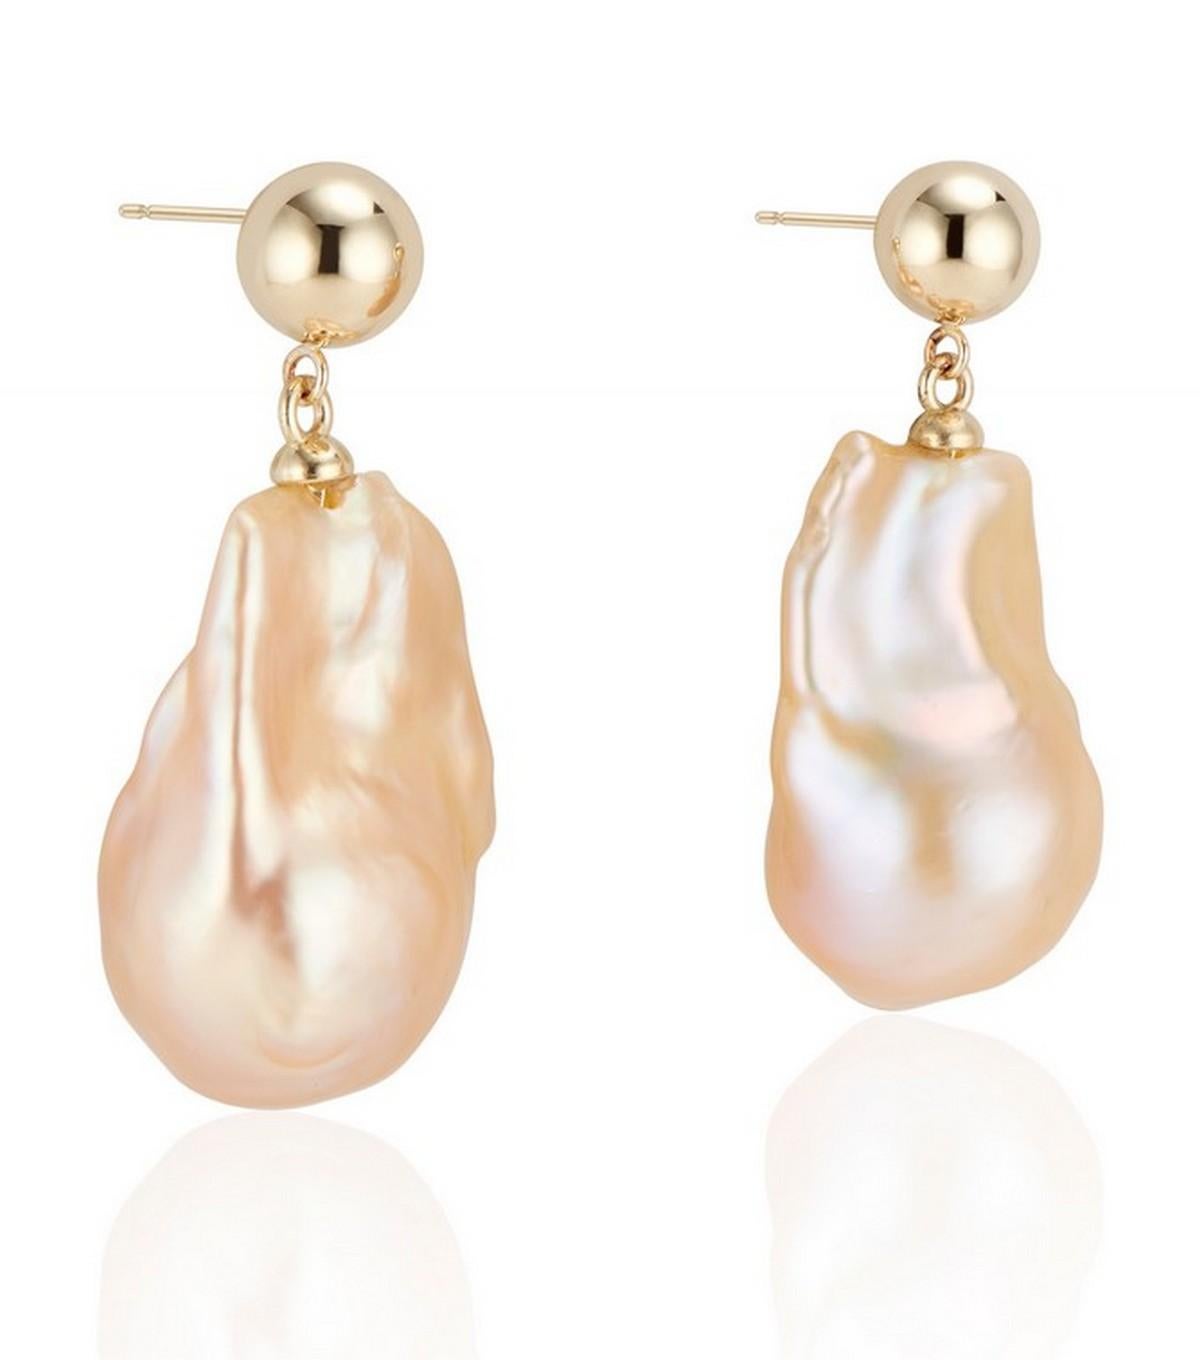 Flaunt your style with the Double Bubble earrings, showcasing a sleek 7.5mm hollow ball in 14k yellow gold, polished to a mirror shine, paired with a captivating golden-hued baroque pearl drop. The pearl's high-quality sheen casts a gentle, radiant